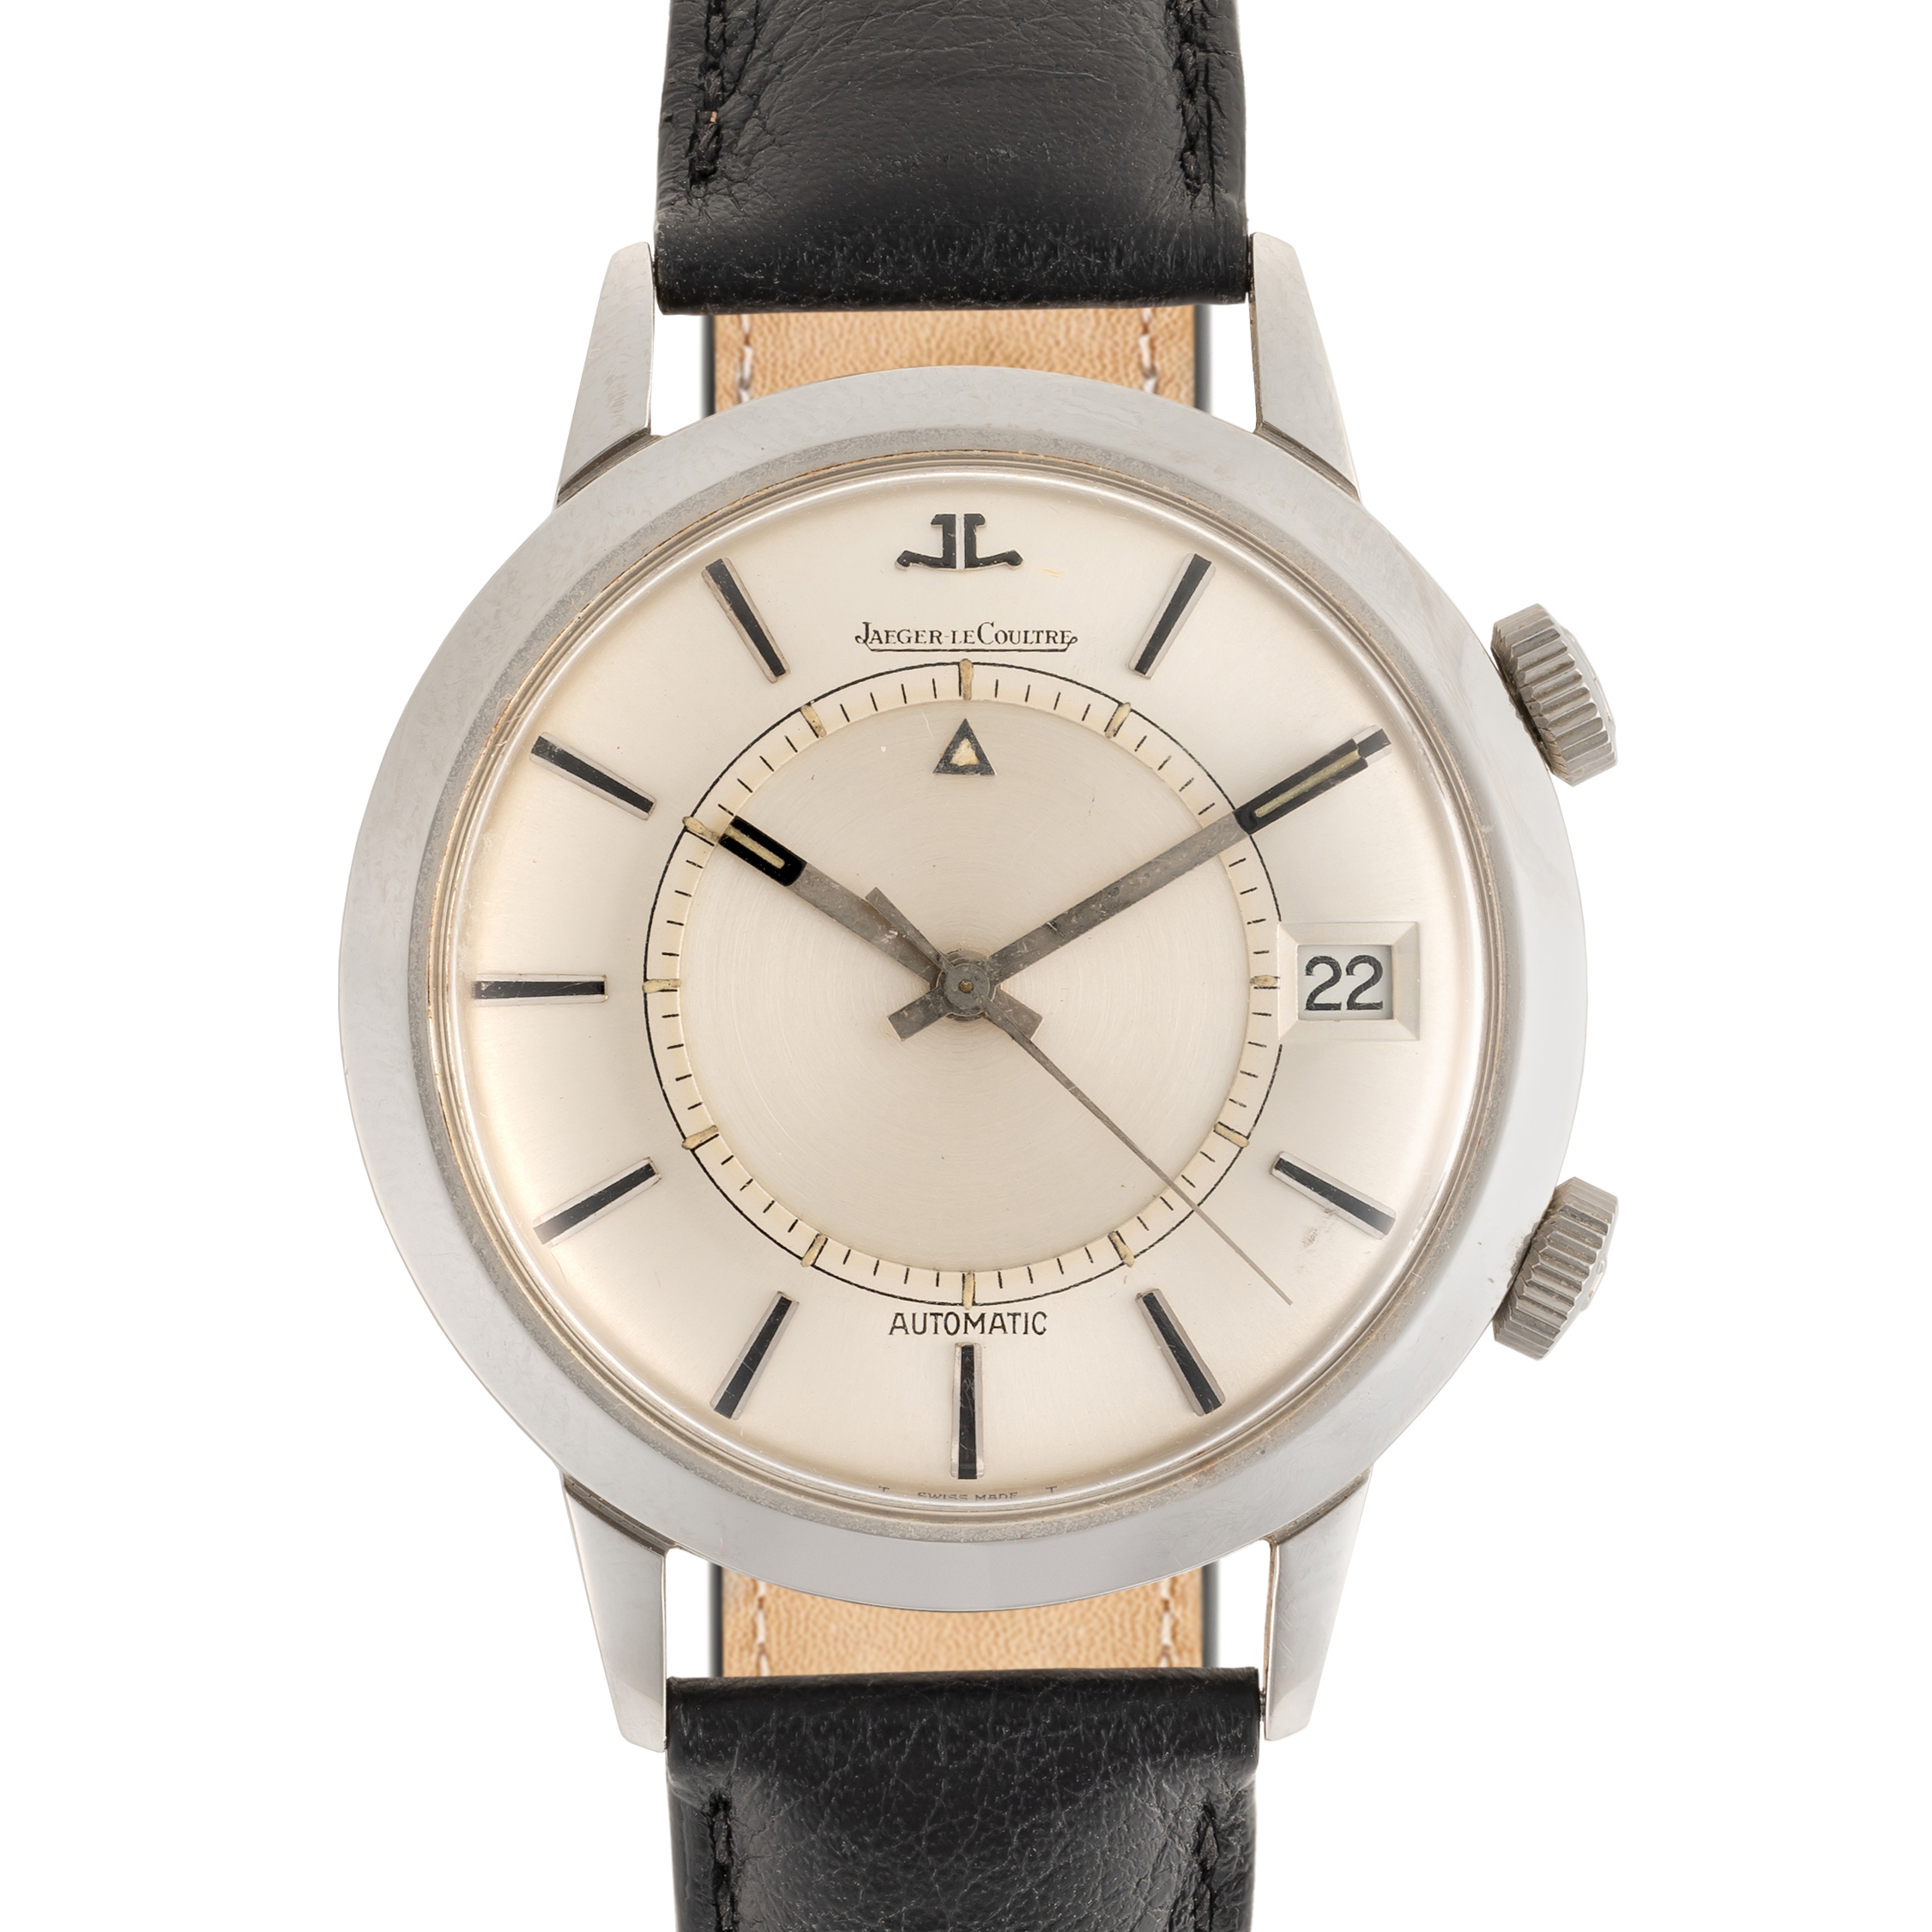 A GENTLEMAN'S SIZE STAINLESS STEEL JAEGER LECOULTRE MEMOVOX AUTOMATIC ALARM WRIST WATCH CIRCA 1960s,